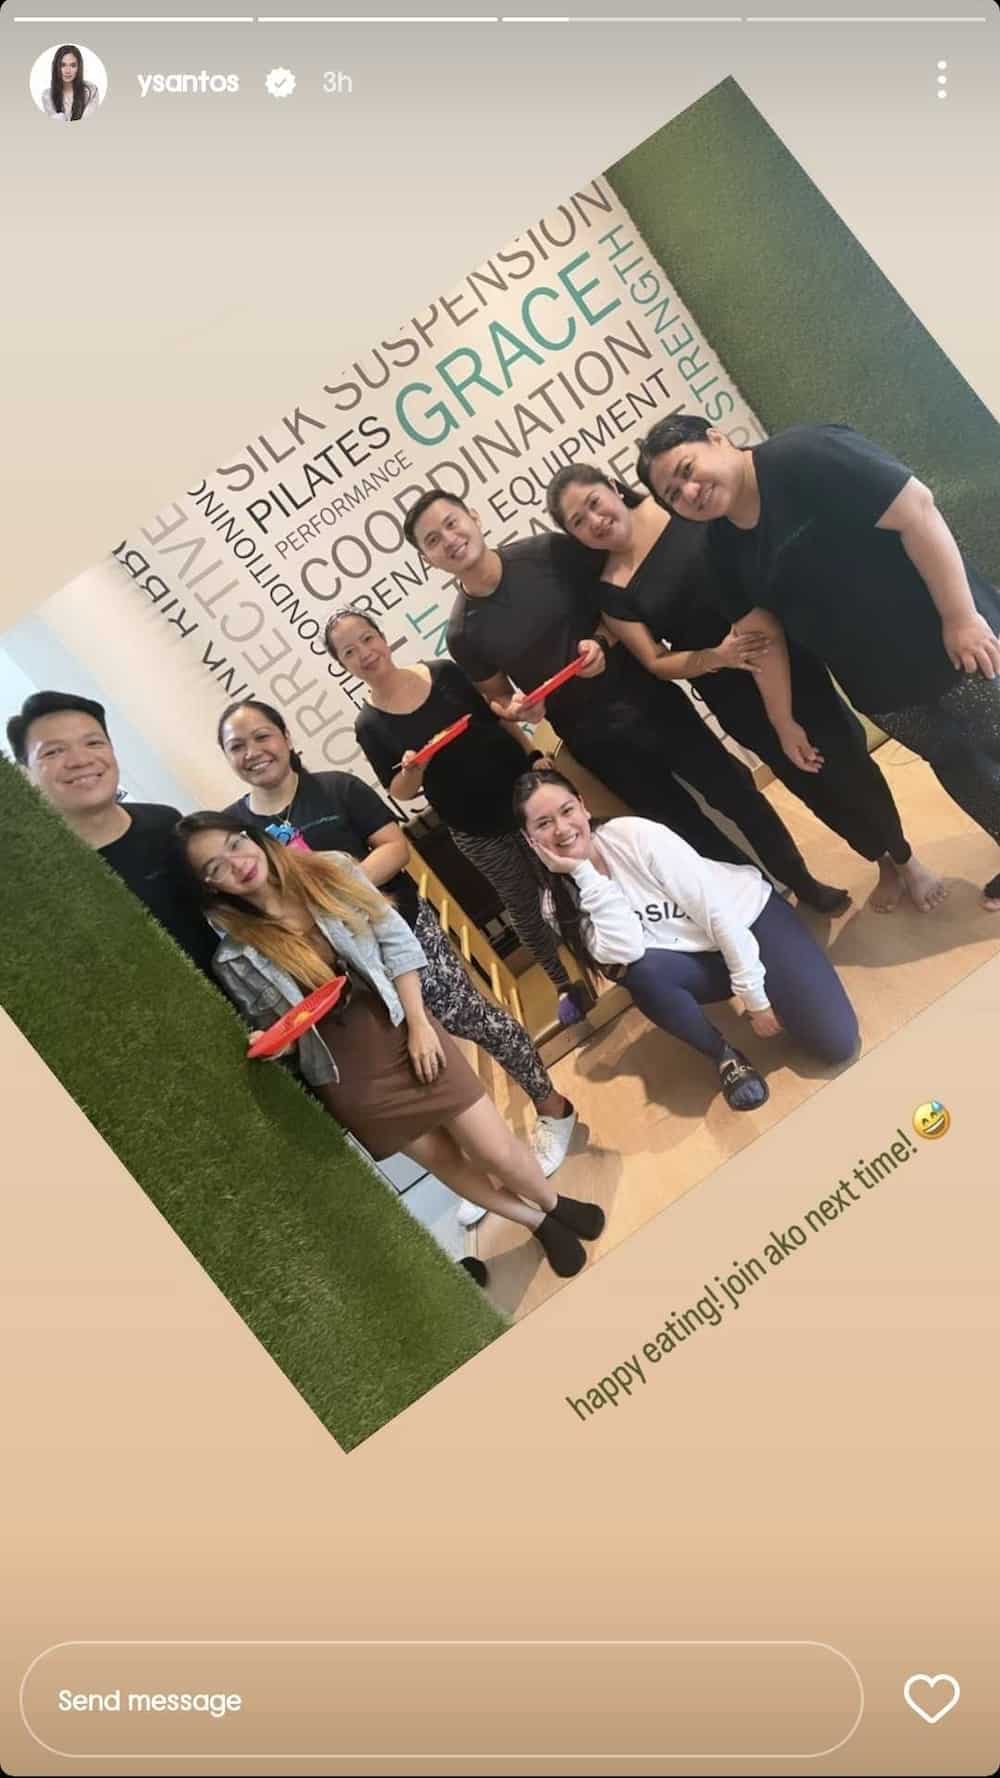 Yen Santos gives a glimpse into her recent pilates session in viral online posts